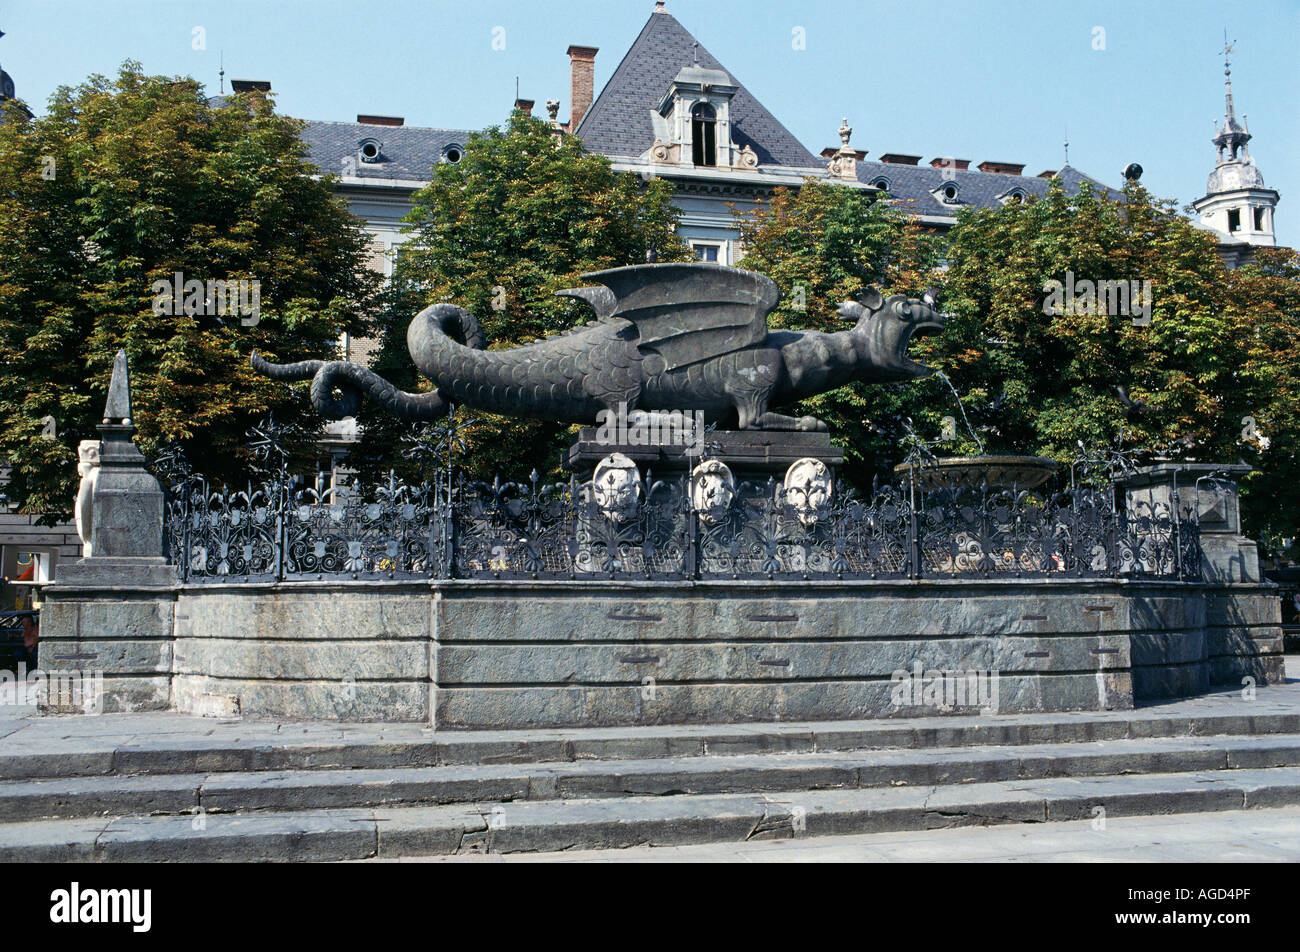 The Lindwurmbrunnen dragon fountain heraldic emblem of Klagenfurt capital of Carinthia was carved by Ulrich Vogelsang in 1590 from one block of Chloritic schist its head the skull of a woolly rhinoceros Stock Photo